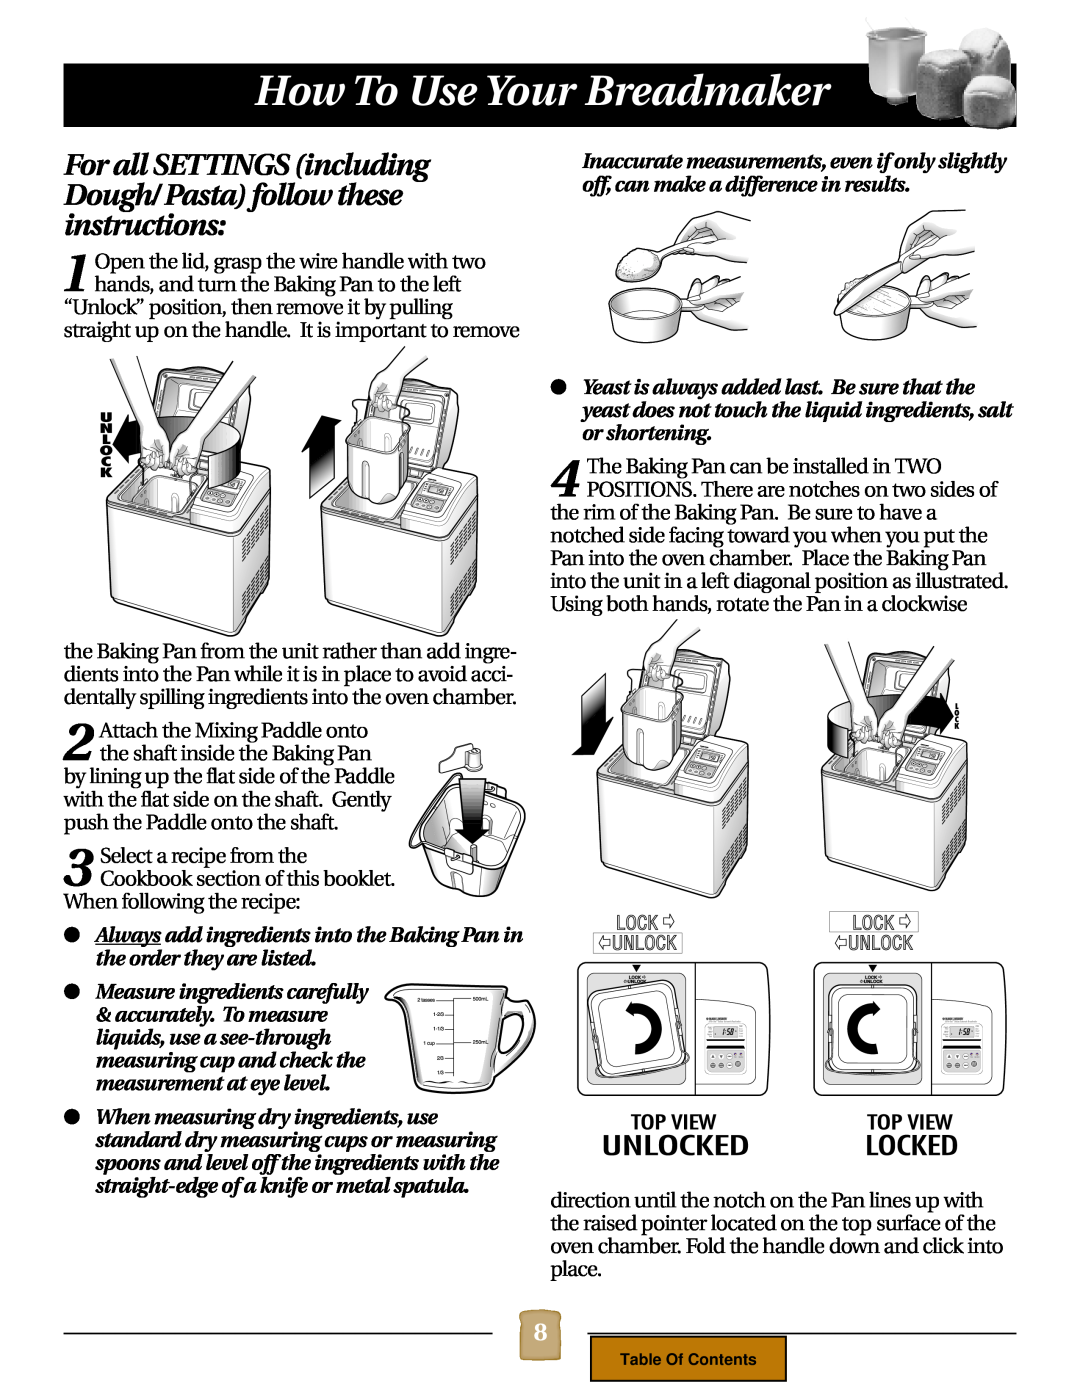 Black & Decker B1620 operating instructions How To Use Your Breadmaker, When following the recipe 